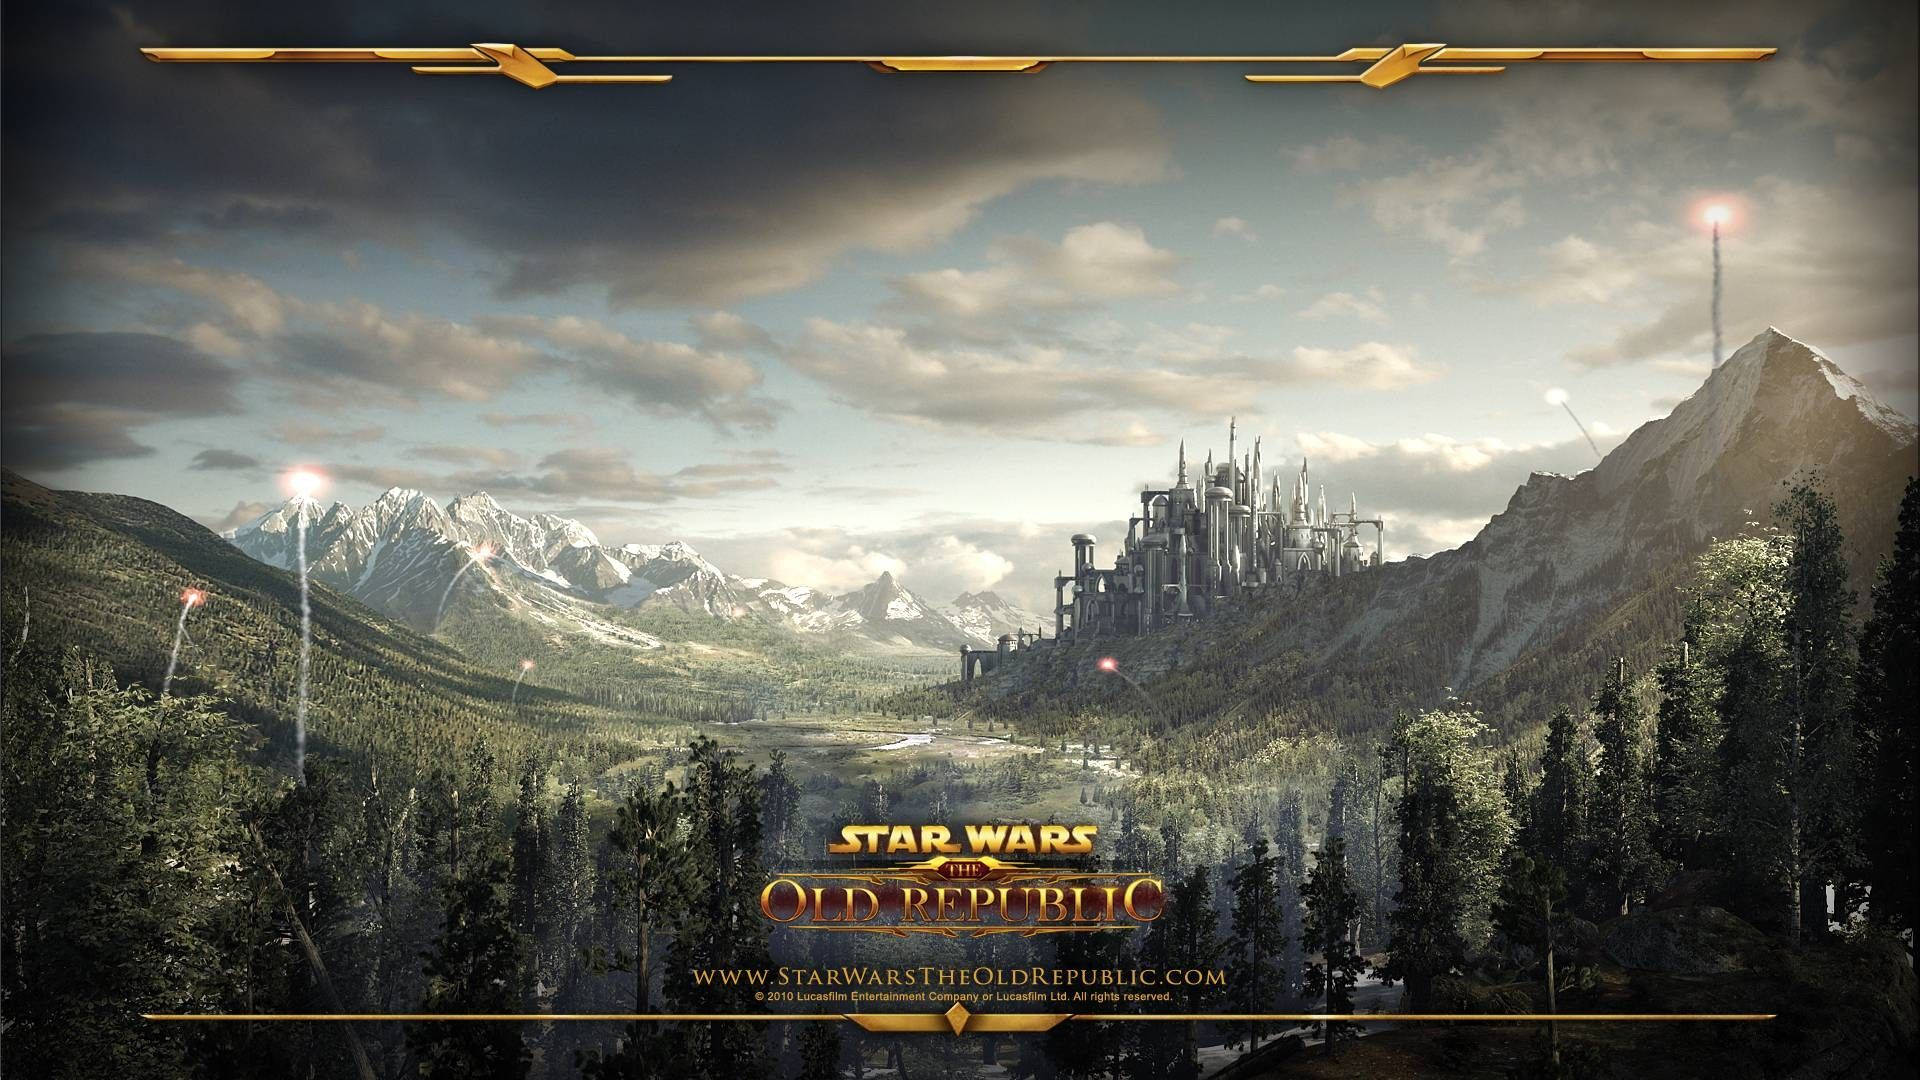 Swtor Fortress In Mountain Wallpaper